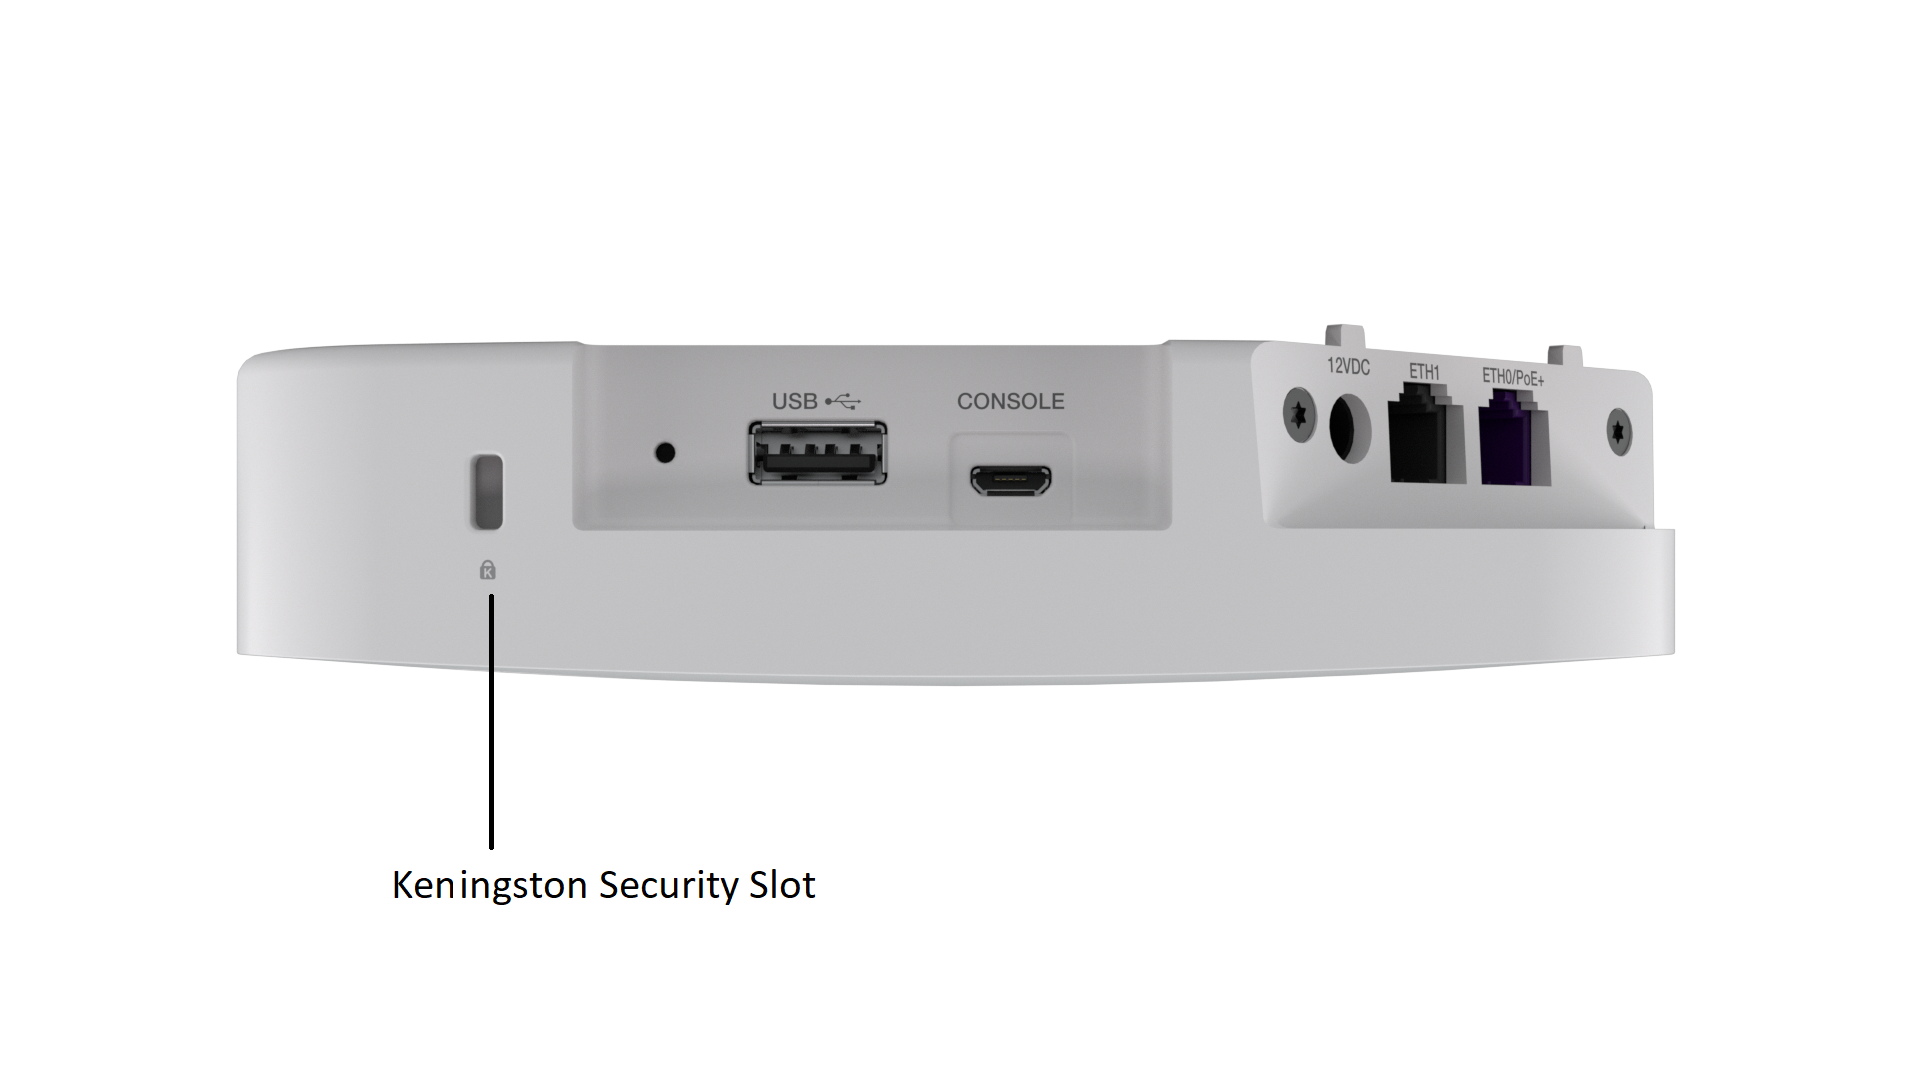 Kensington security slot is used to secure the access point. It is located on the side of the access point.